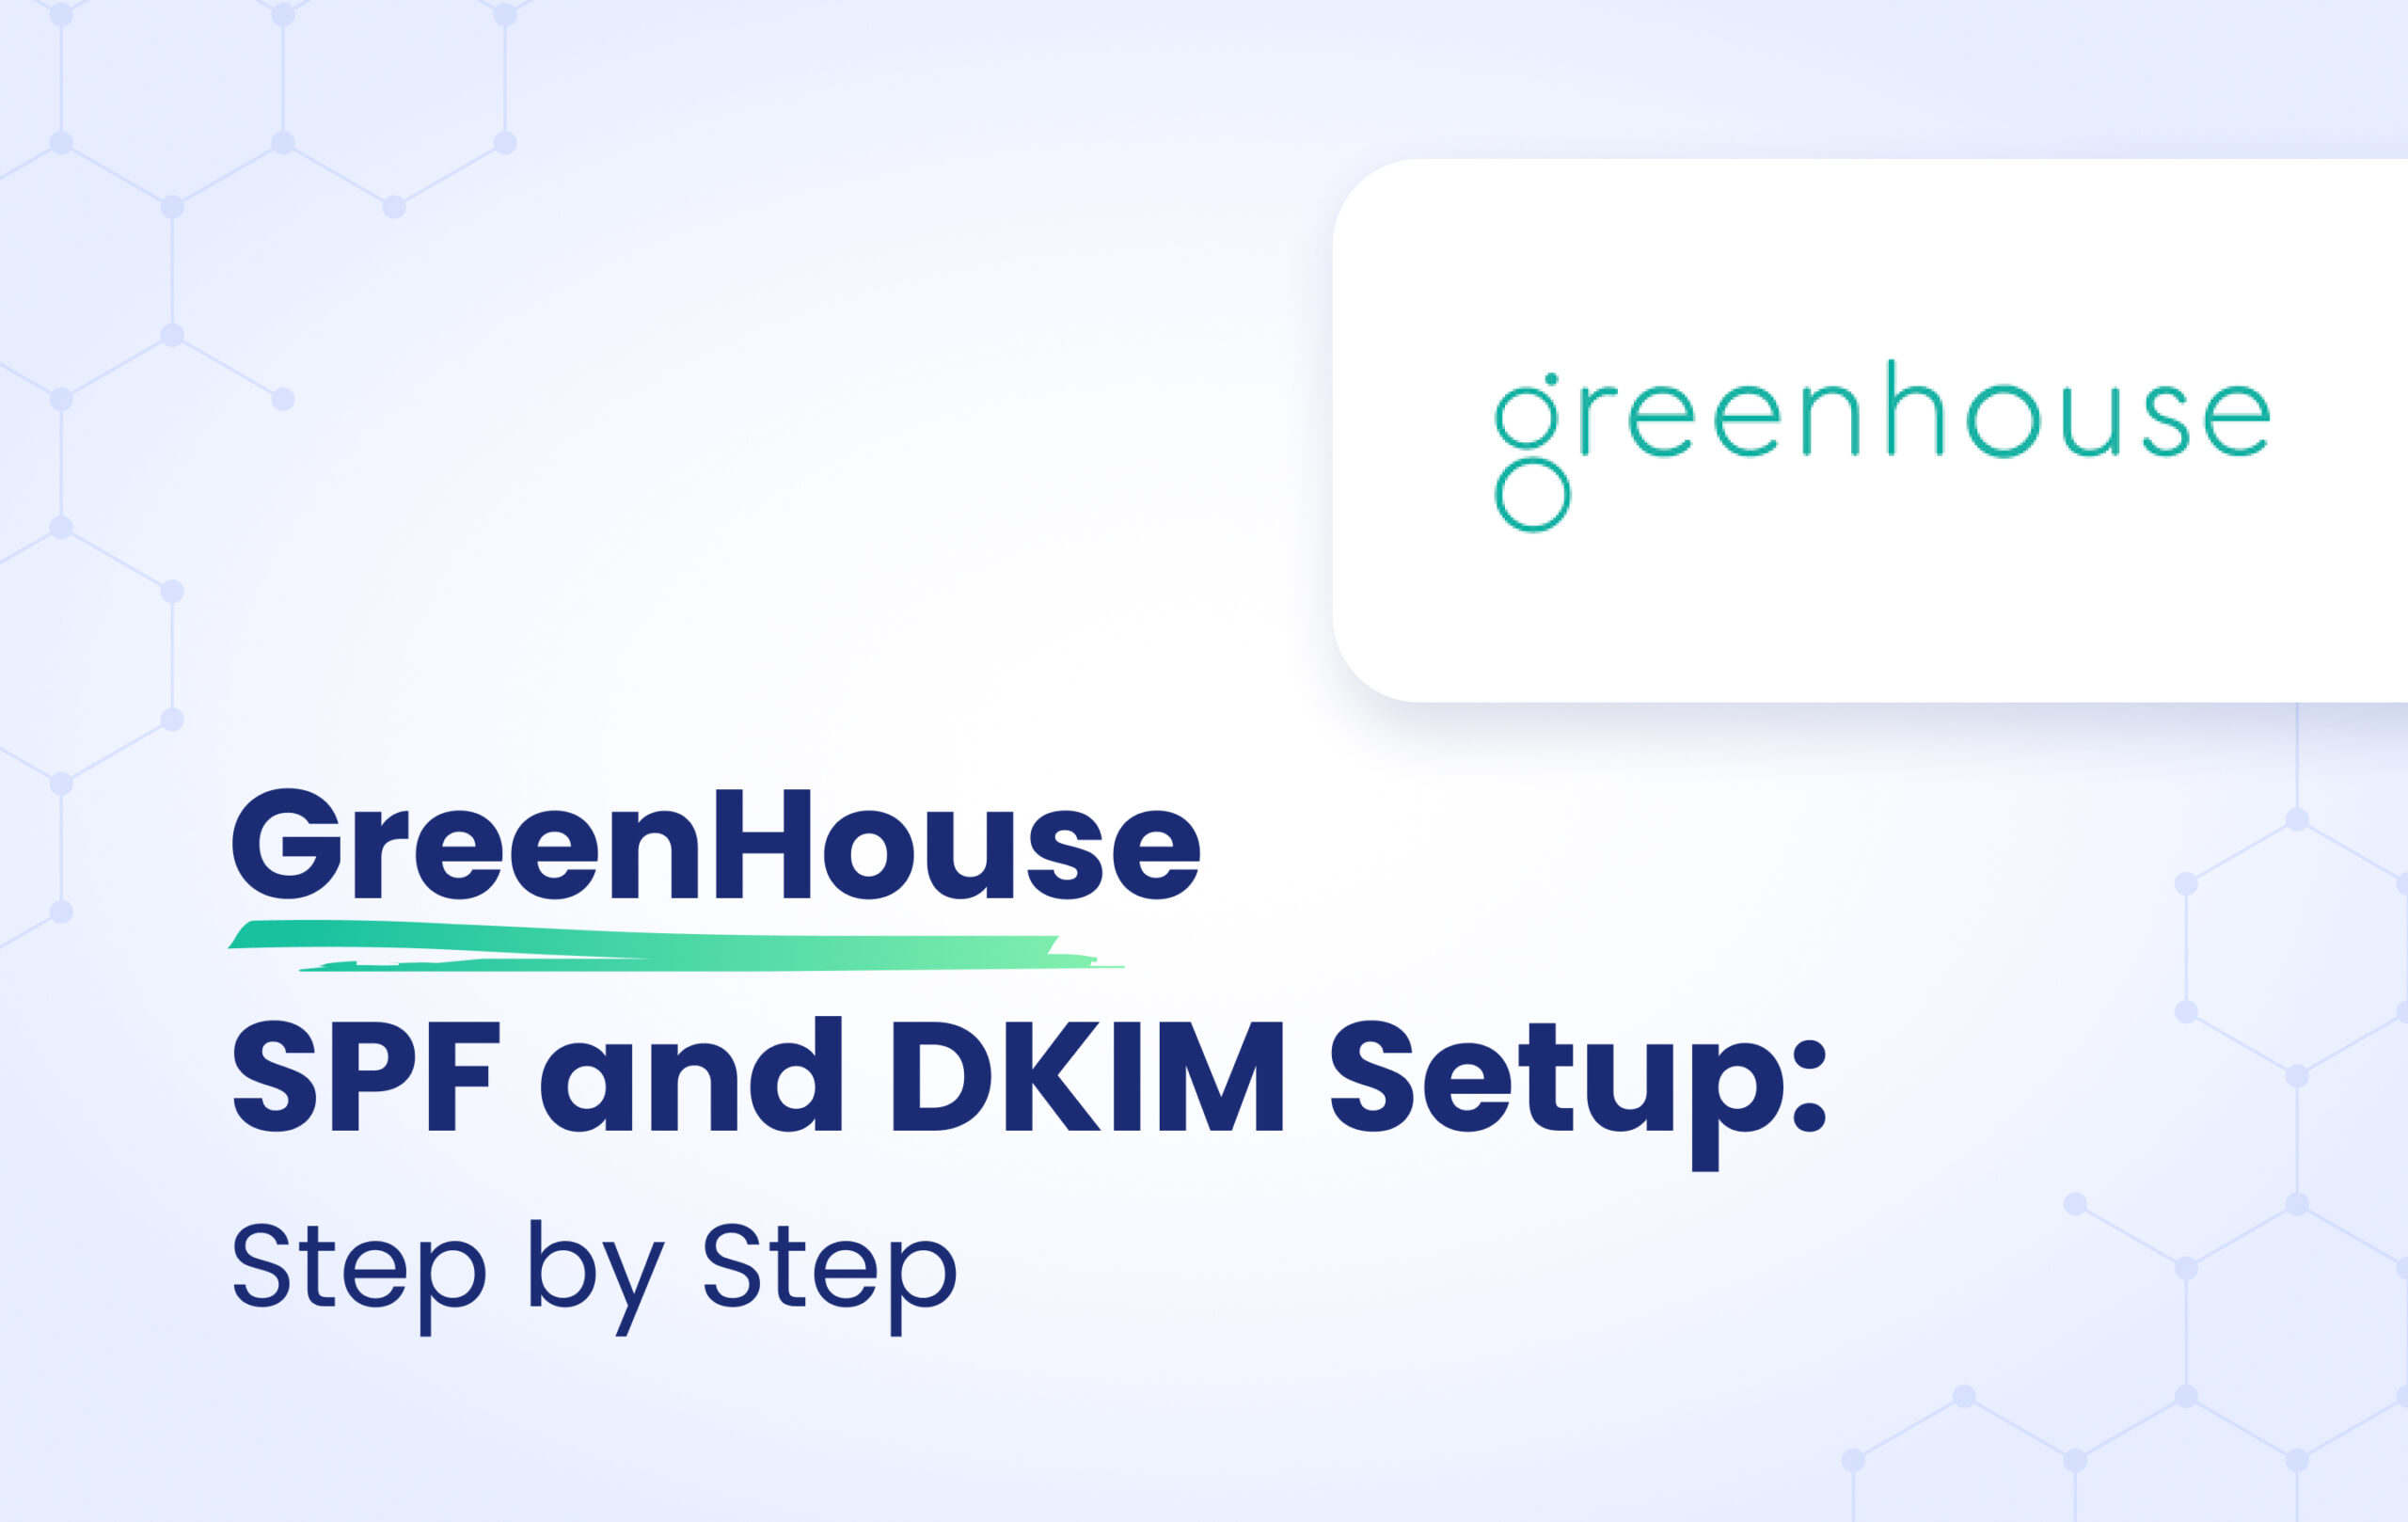 GreenHouse SPF and DKIM Setup: Step-by-Step featured image